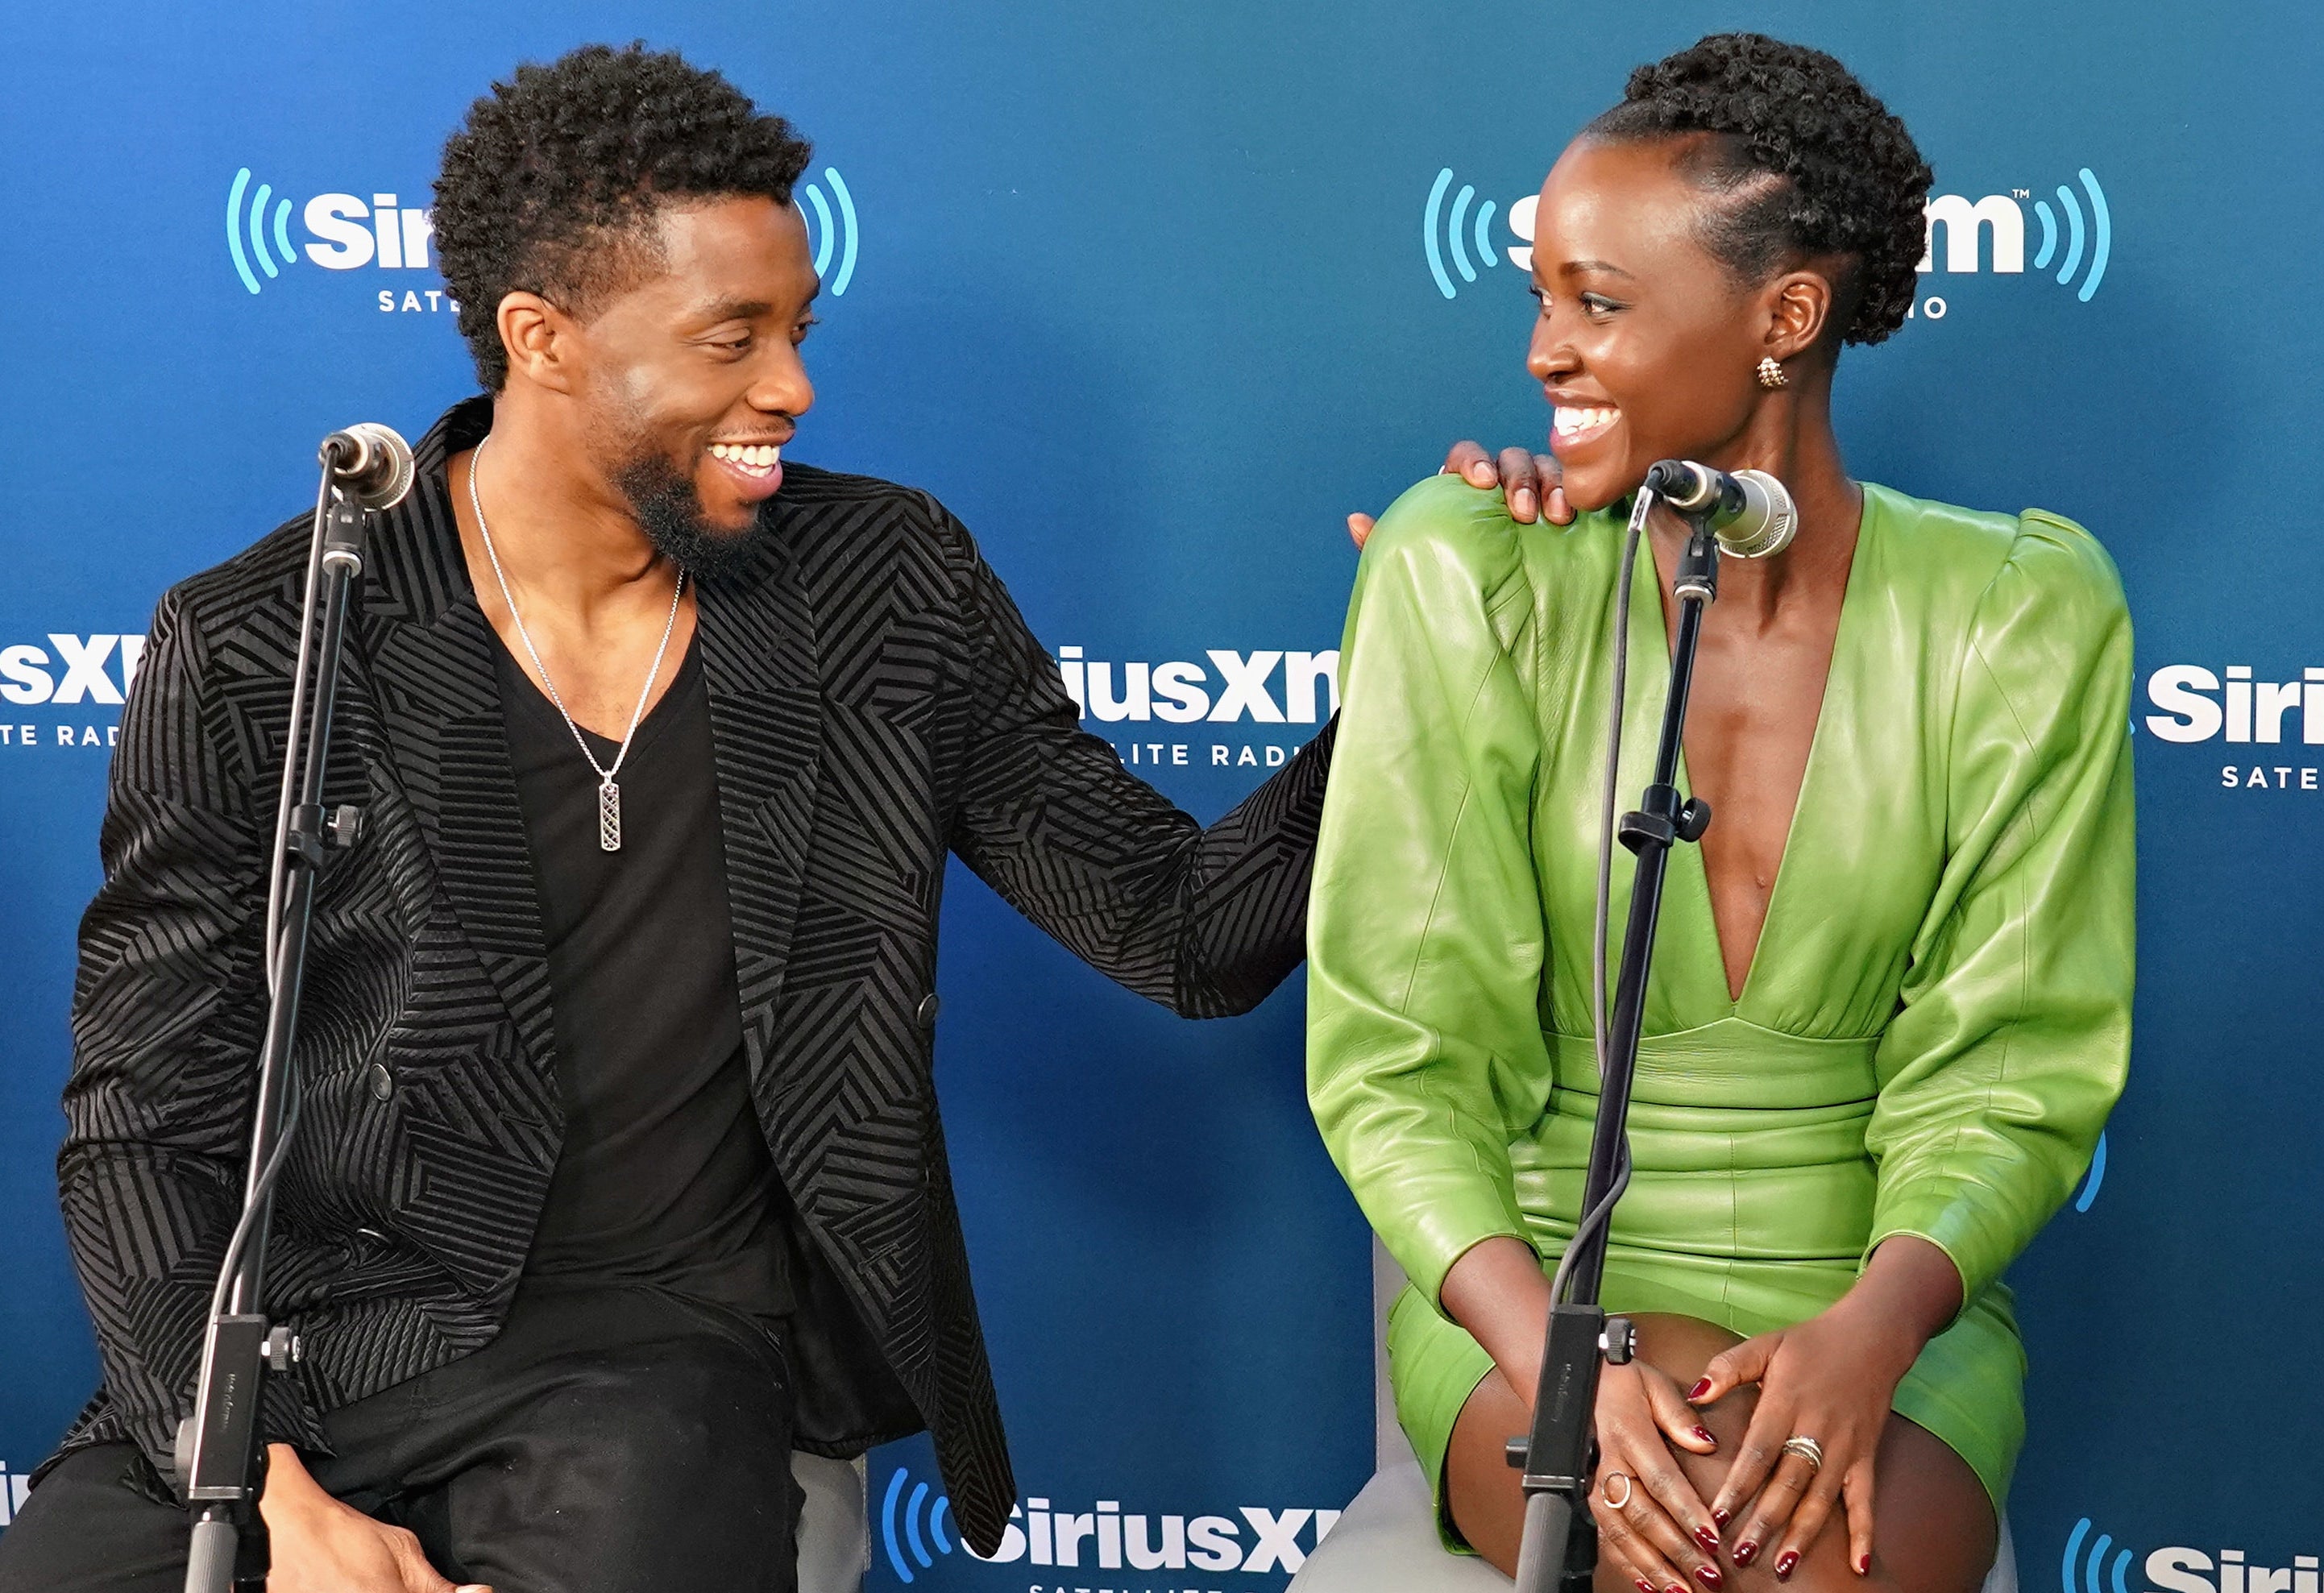 Chadwick puts his hand on Lupita&#x27;s shoulder during an interview